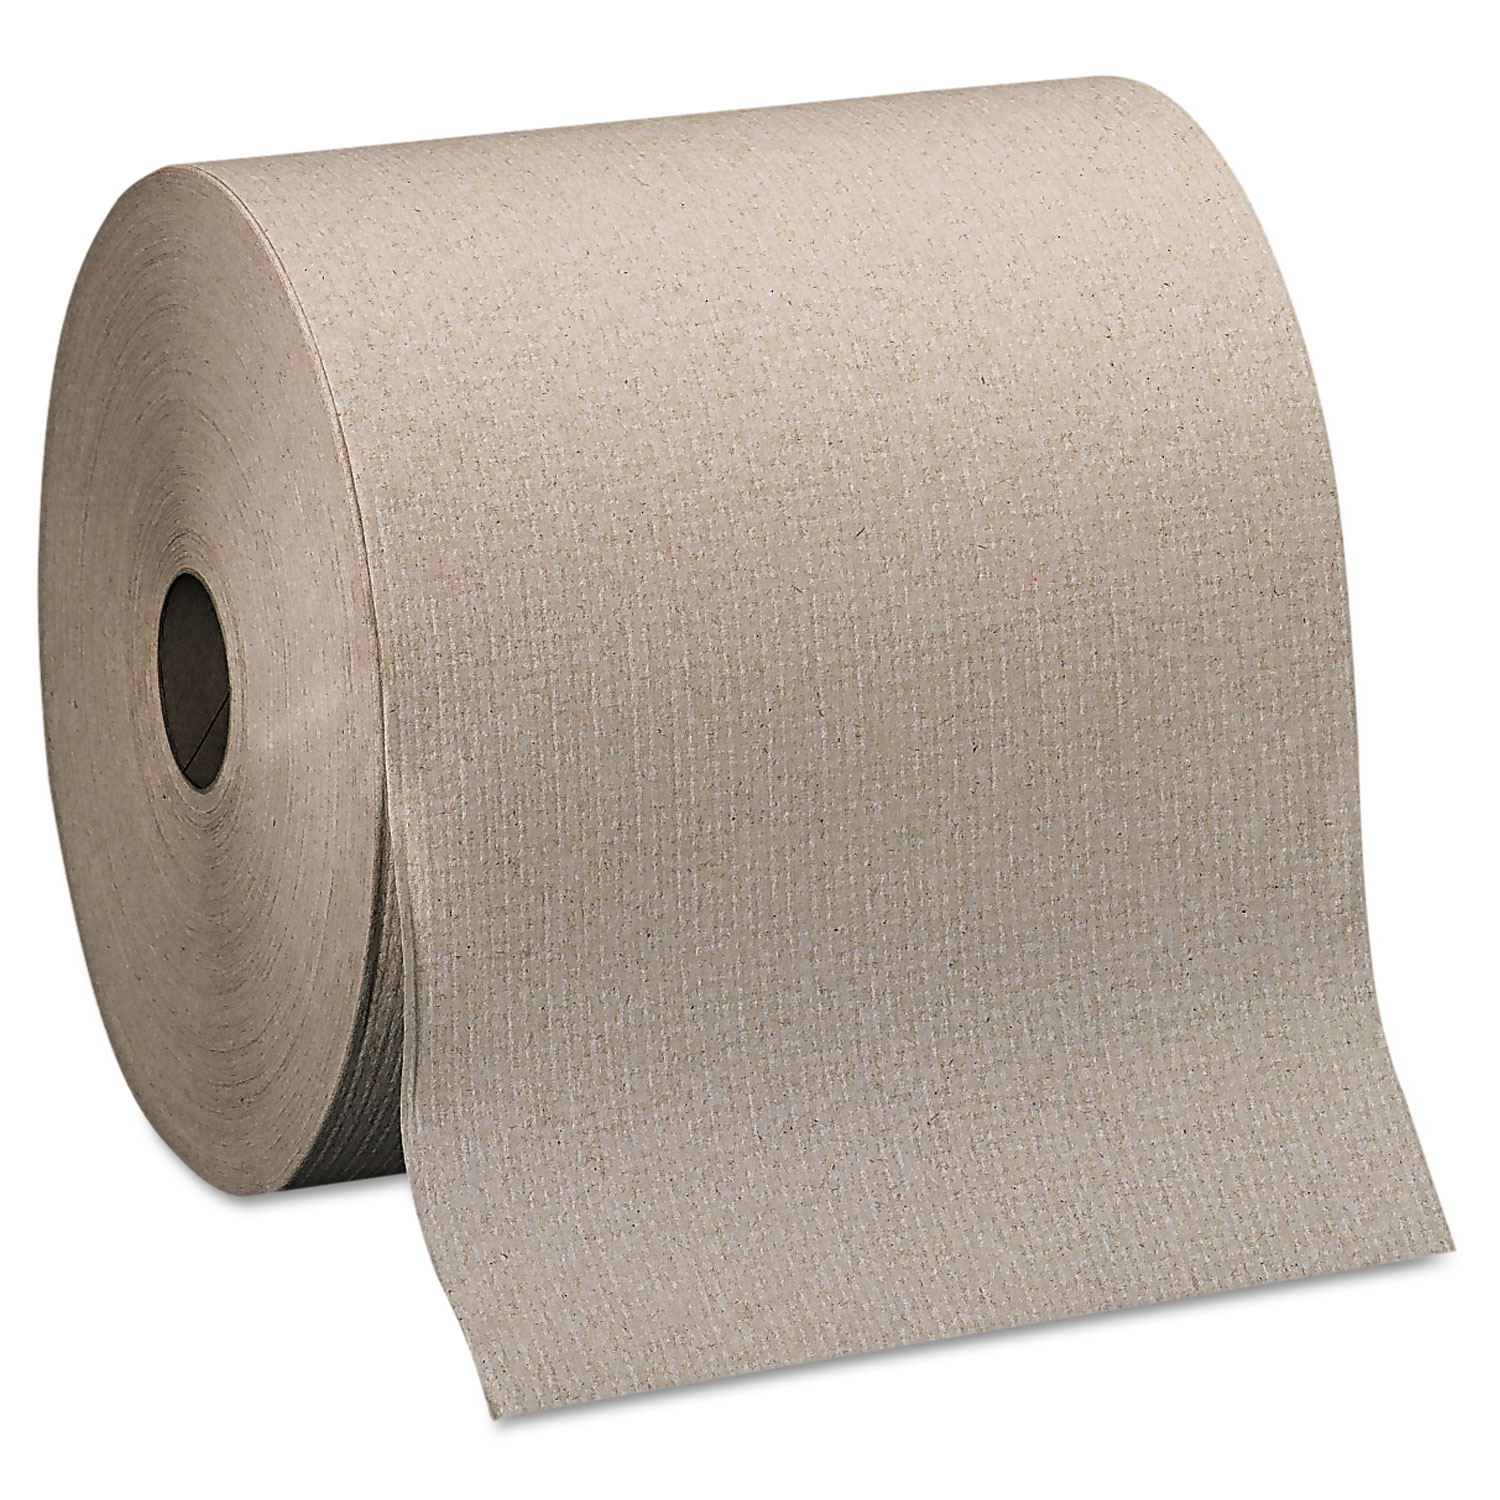 Nonperforated Paper Towel Rolls, 7 7/8 x 800ft, Brown, 6 Rolls/Carton